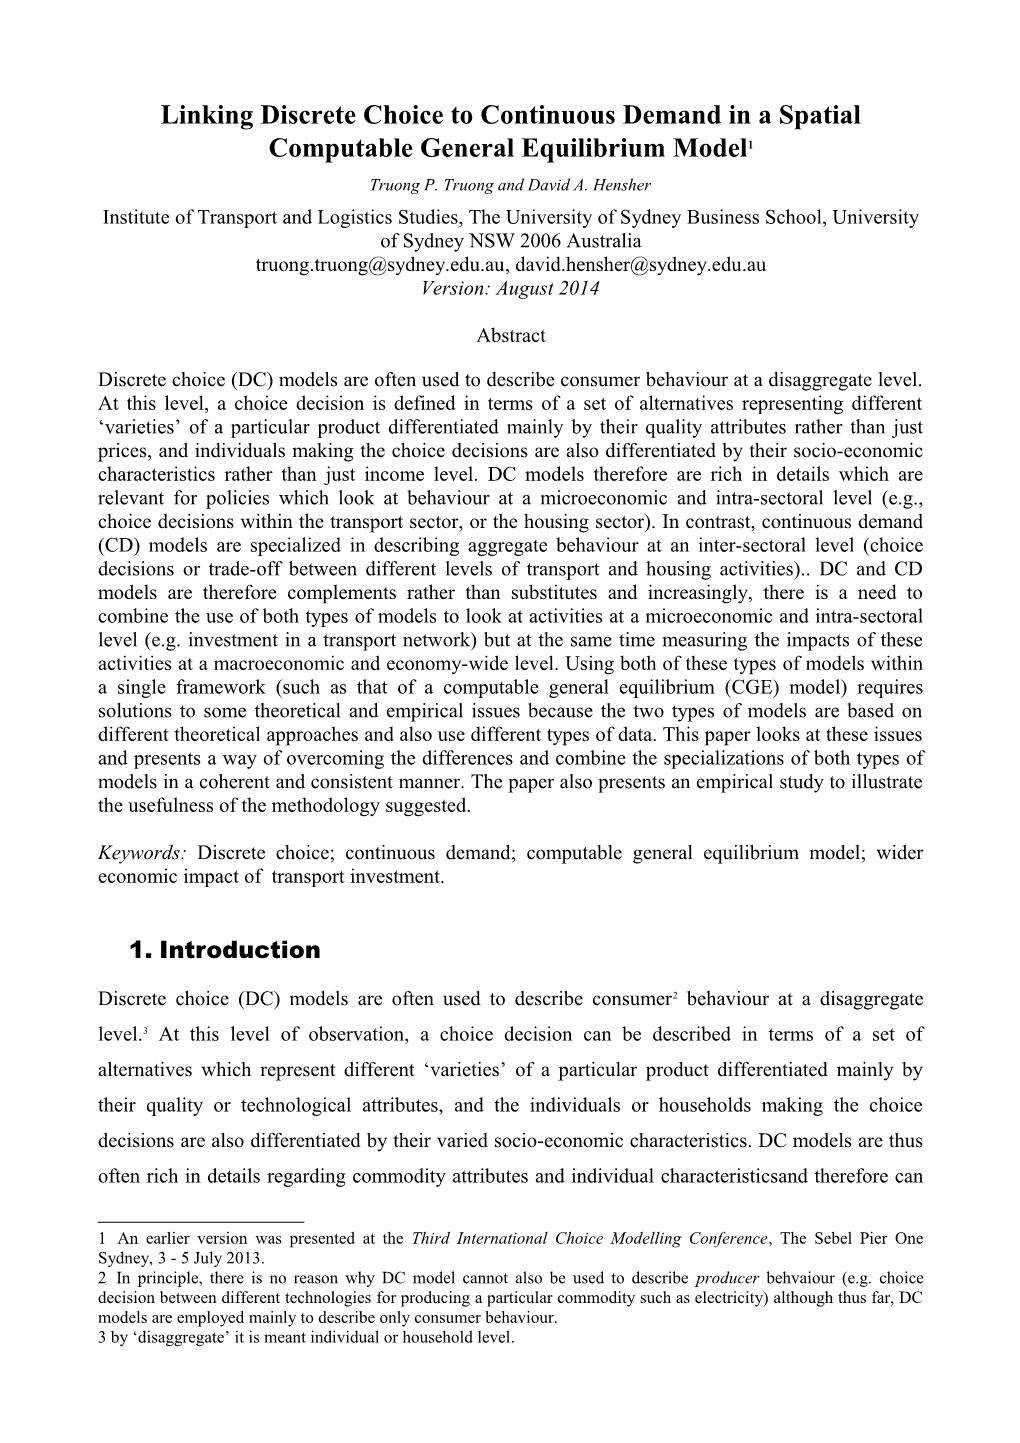 Linking Discrete Choice to Continuous Demand in a Spatial Computable General Equilibrium